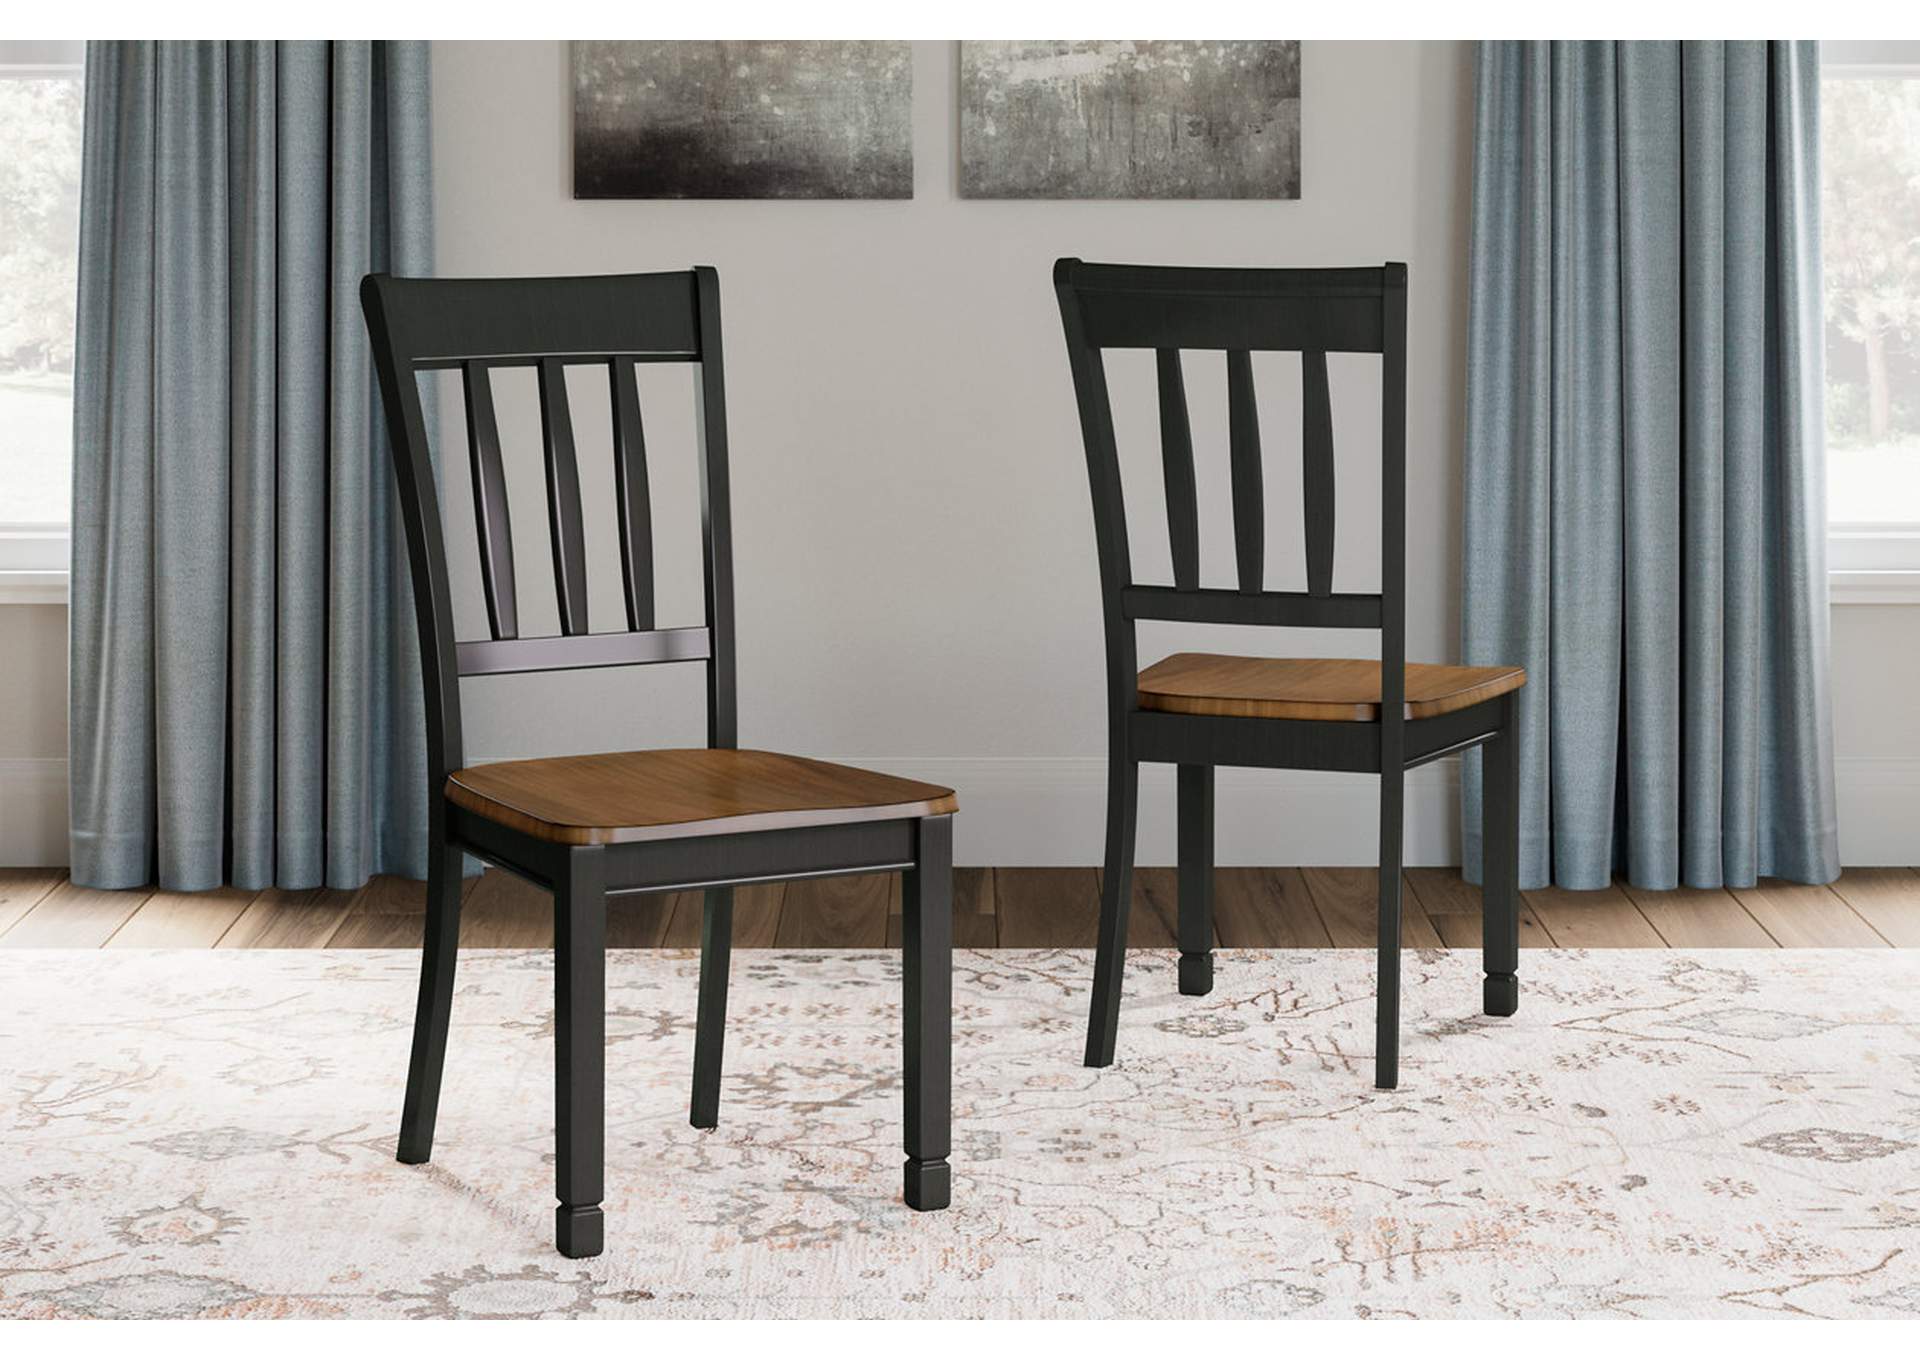 Owingsville Dining Chair,Signature Design By Ashley